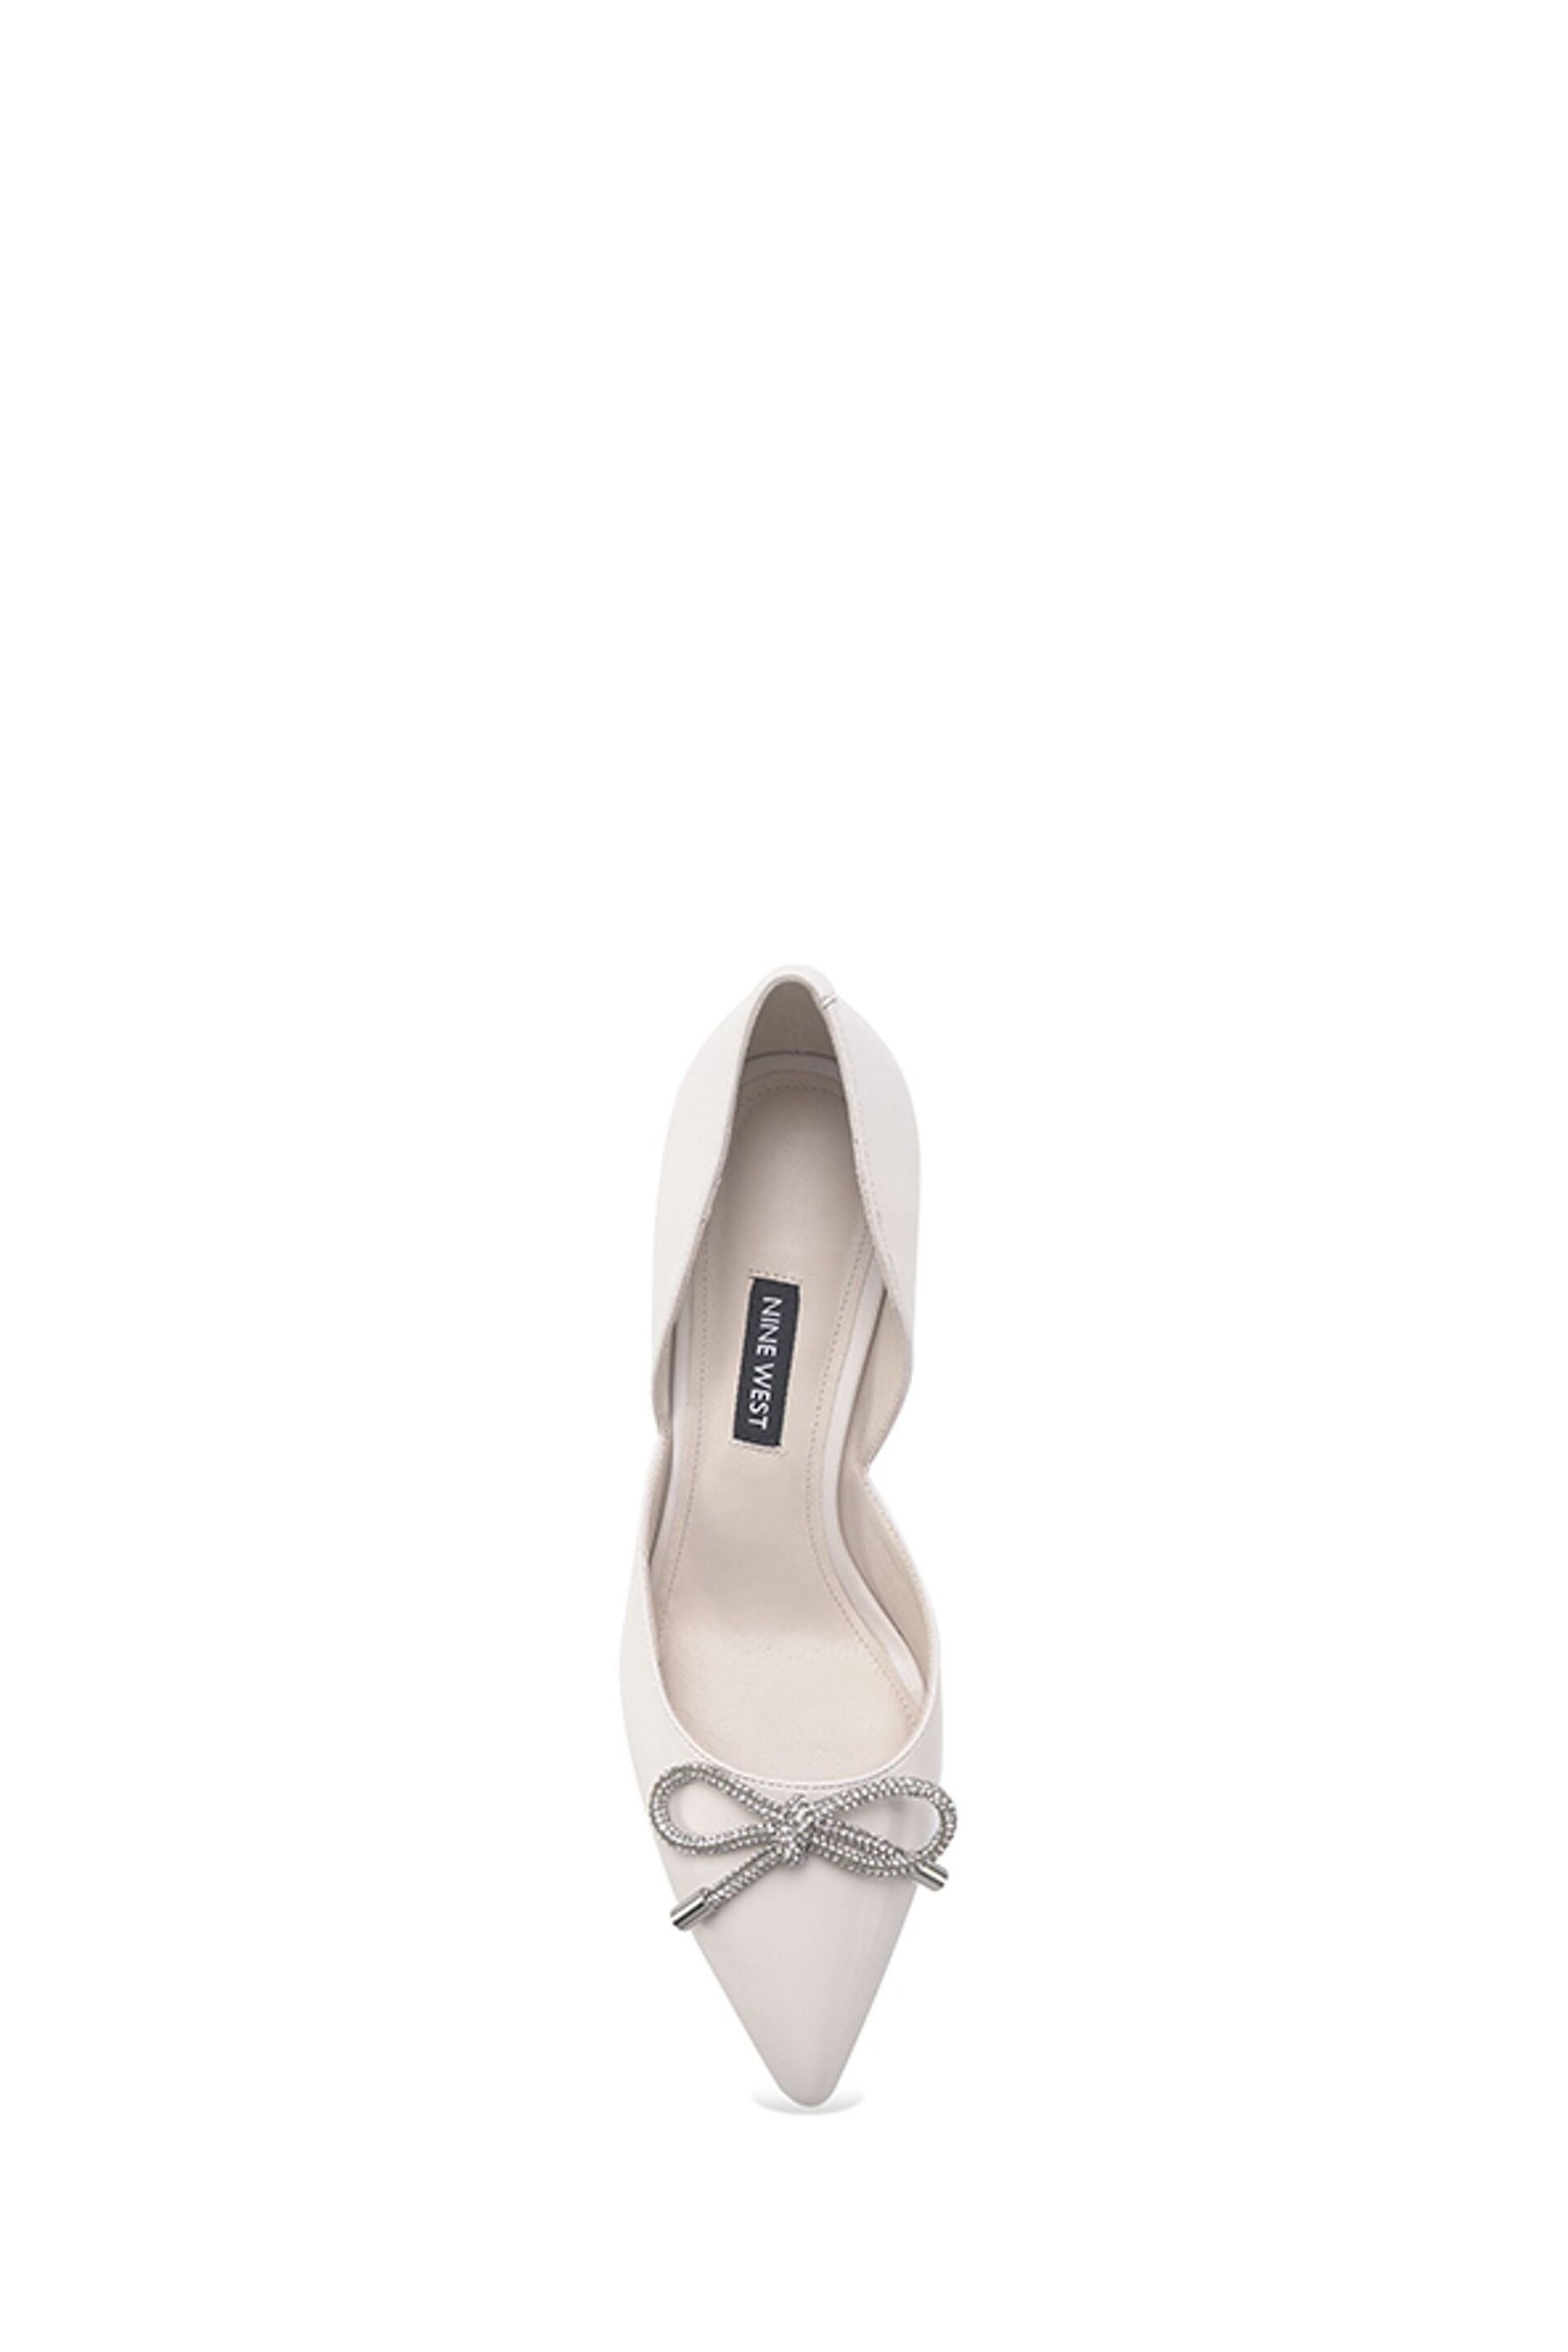 Nine West Womens 'Mangie' Spool Heel Evening White Shoes with Bow Detail - Image 2 of 2